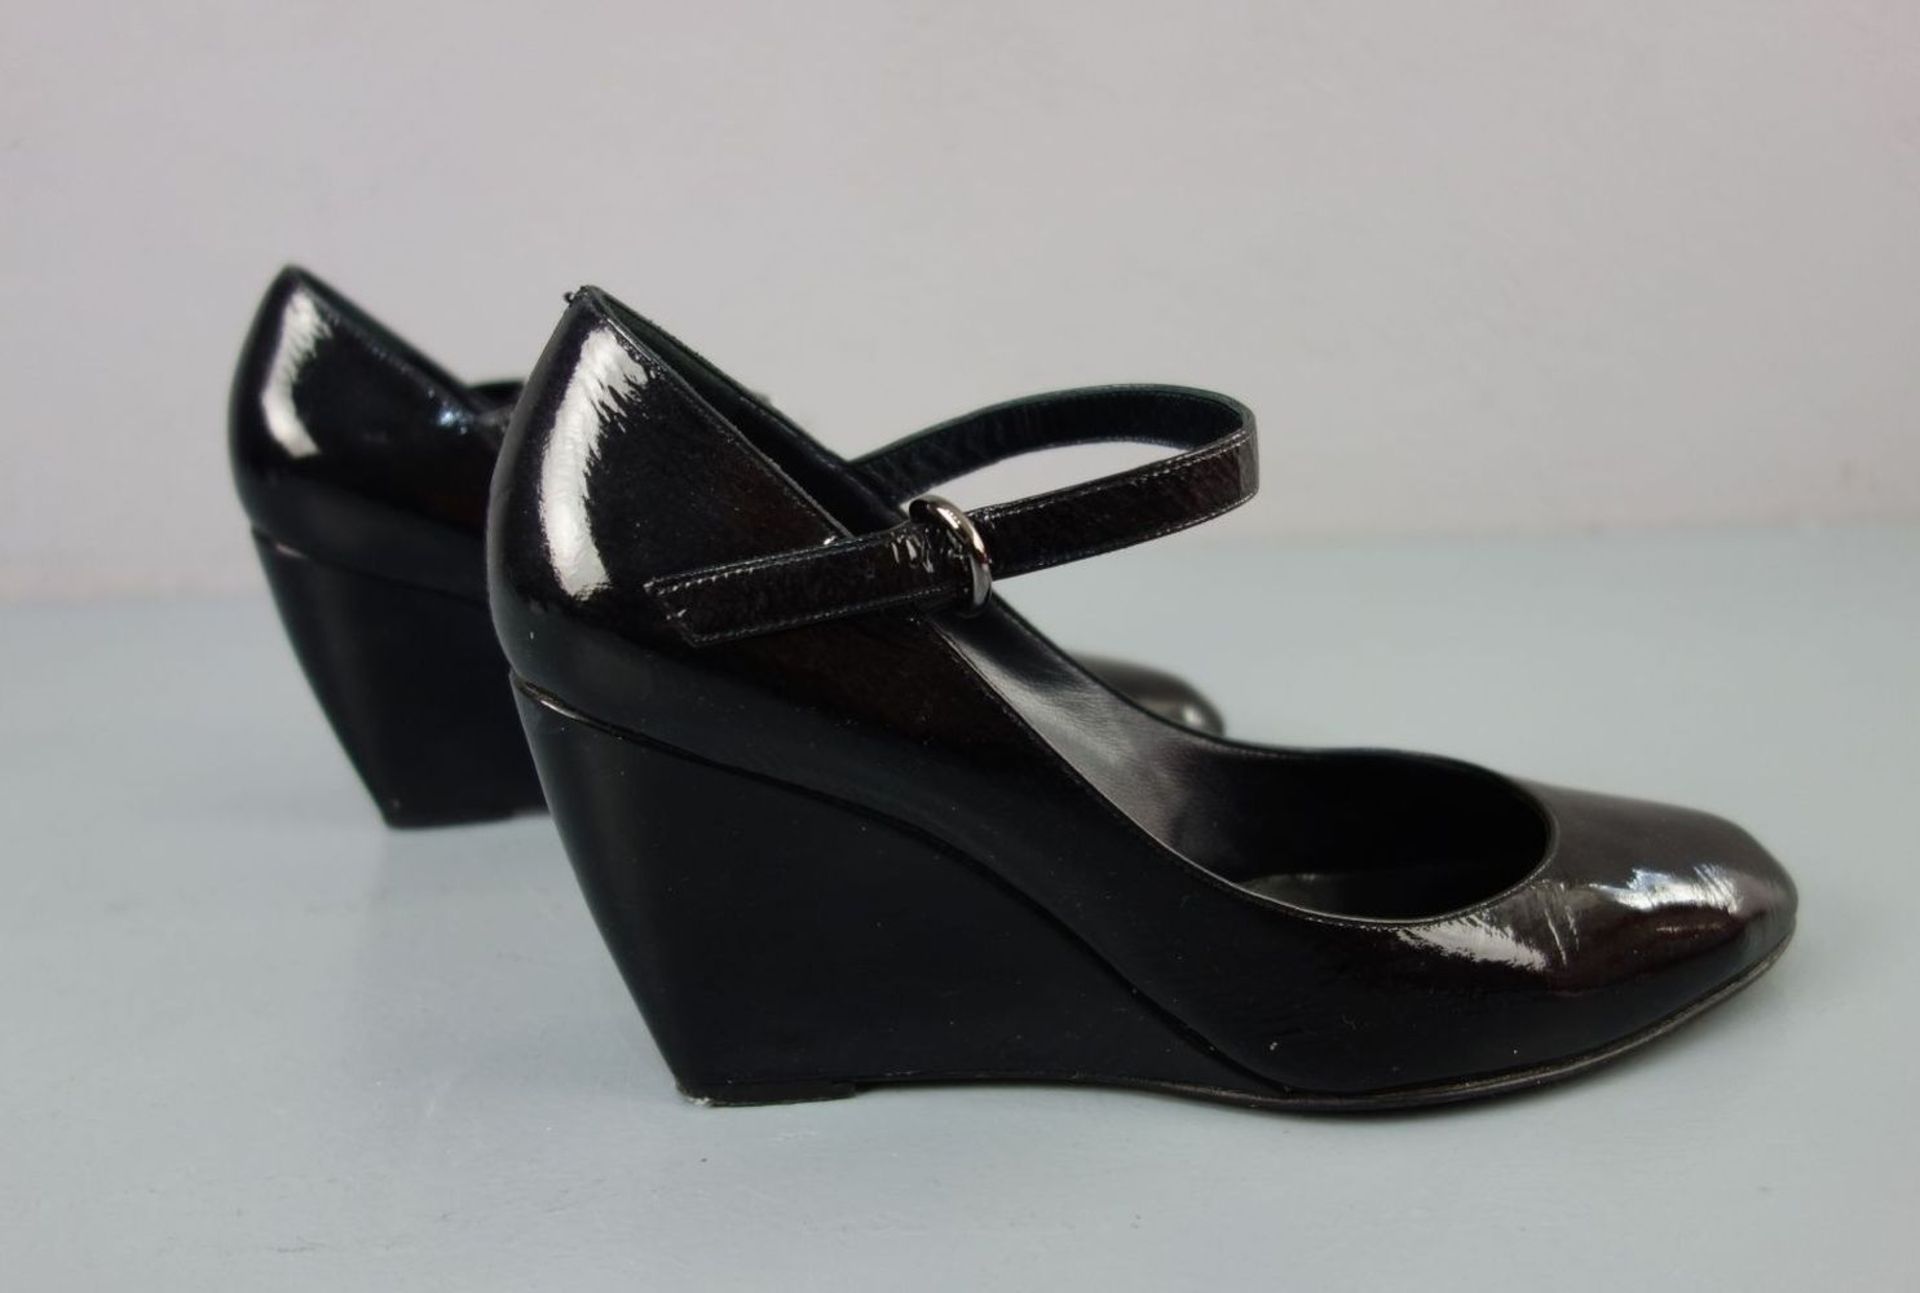 SERGIO ROSSI KEILPUMPS / women's shoes with wedge heel, Made in Italy, schwarzes Lackleder. Pumps - Image 4 of 6